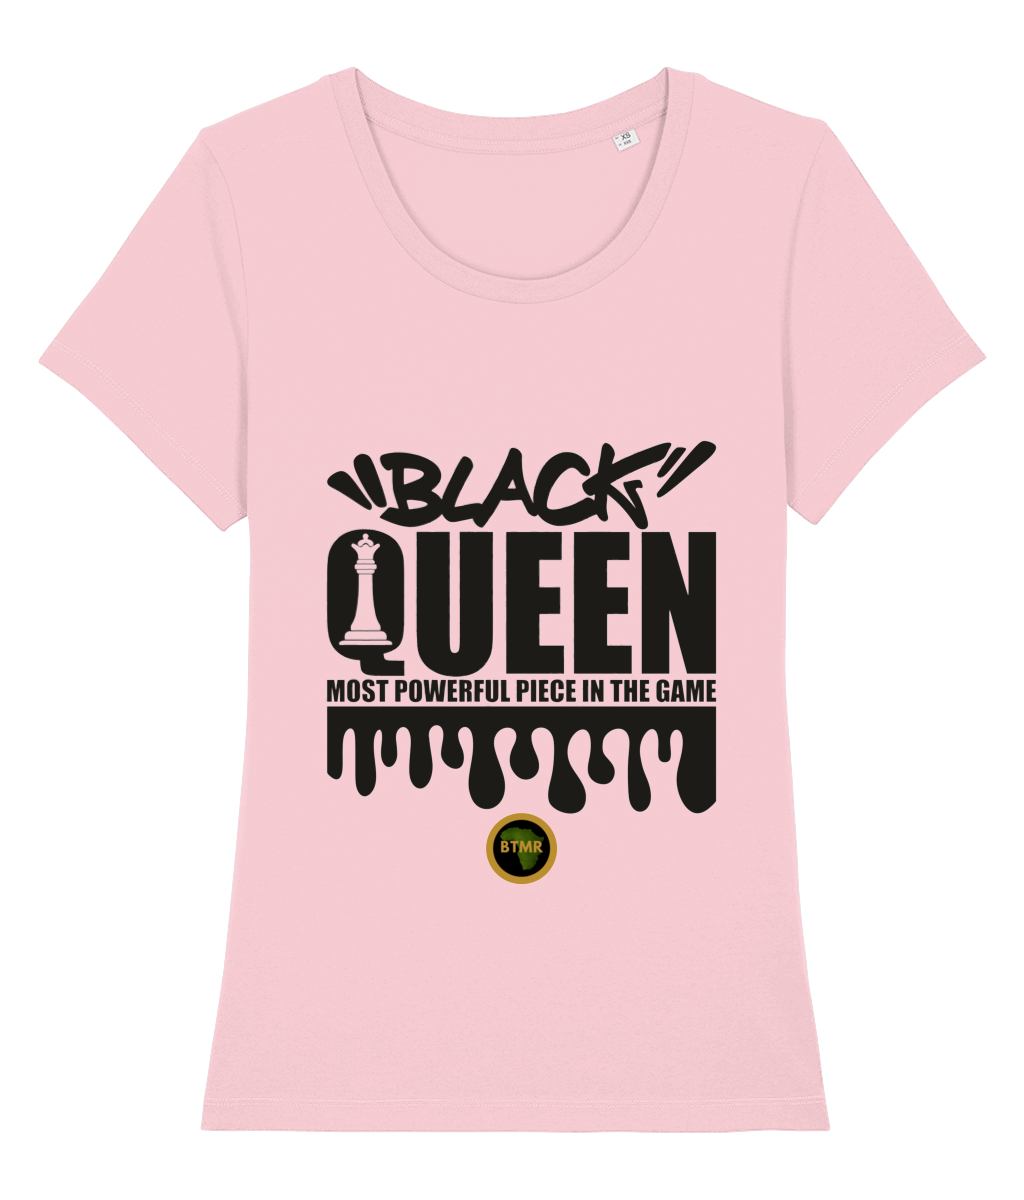 Black Queen Chess| Statement T Shirt | Womens | Fitted, Short Sleeved